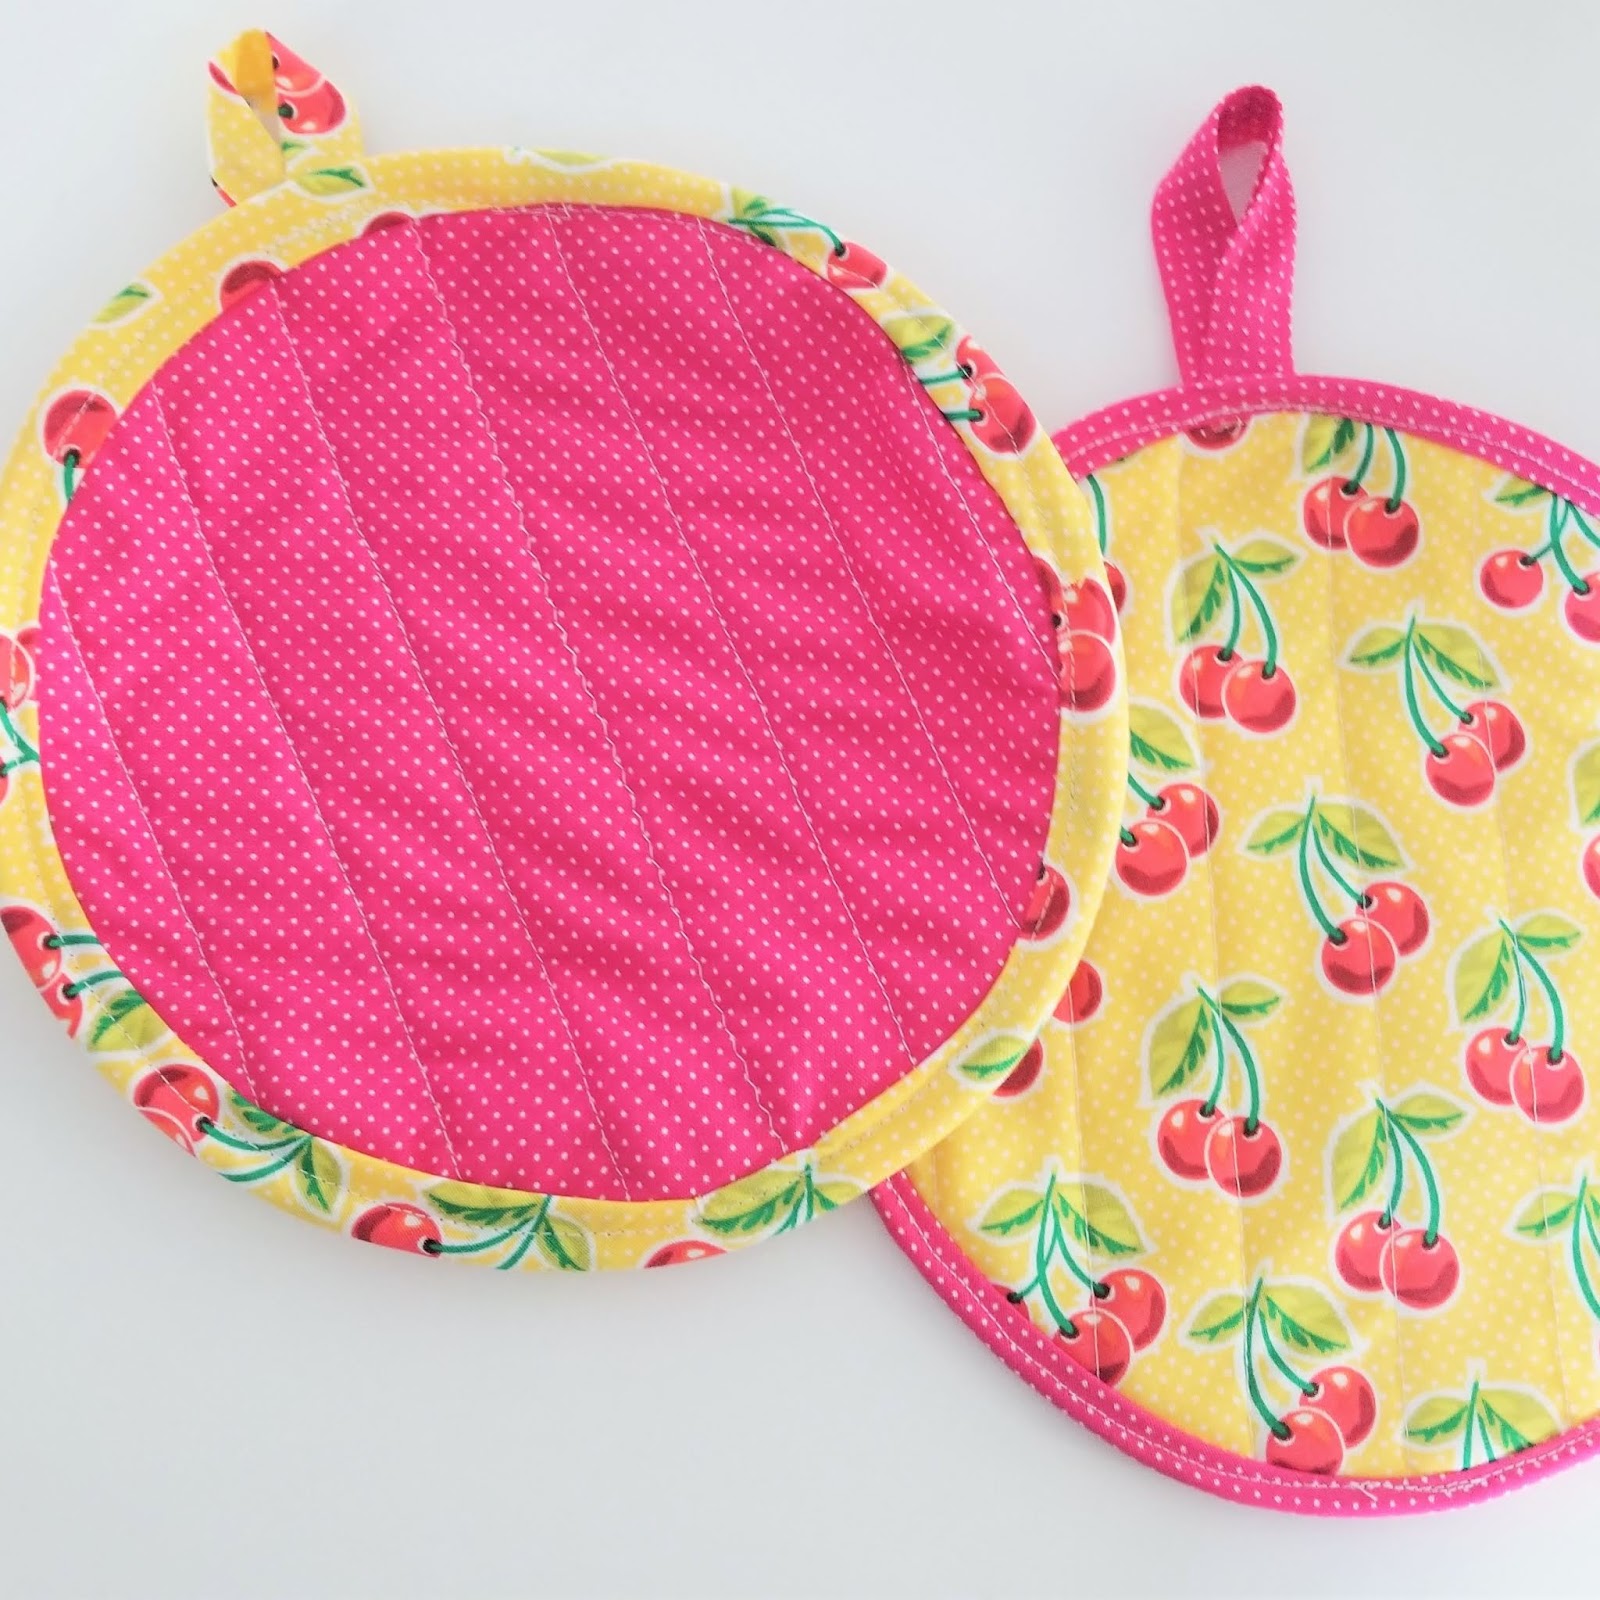 Learn How to Sew a Simple Potholder for Your Kitchen